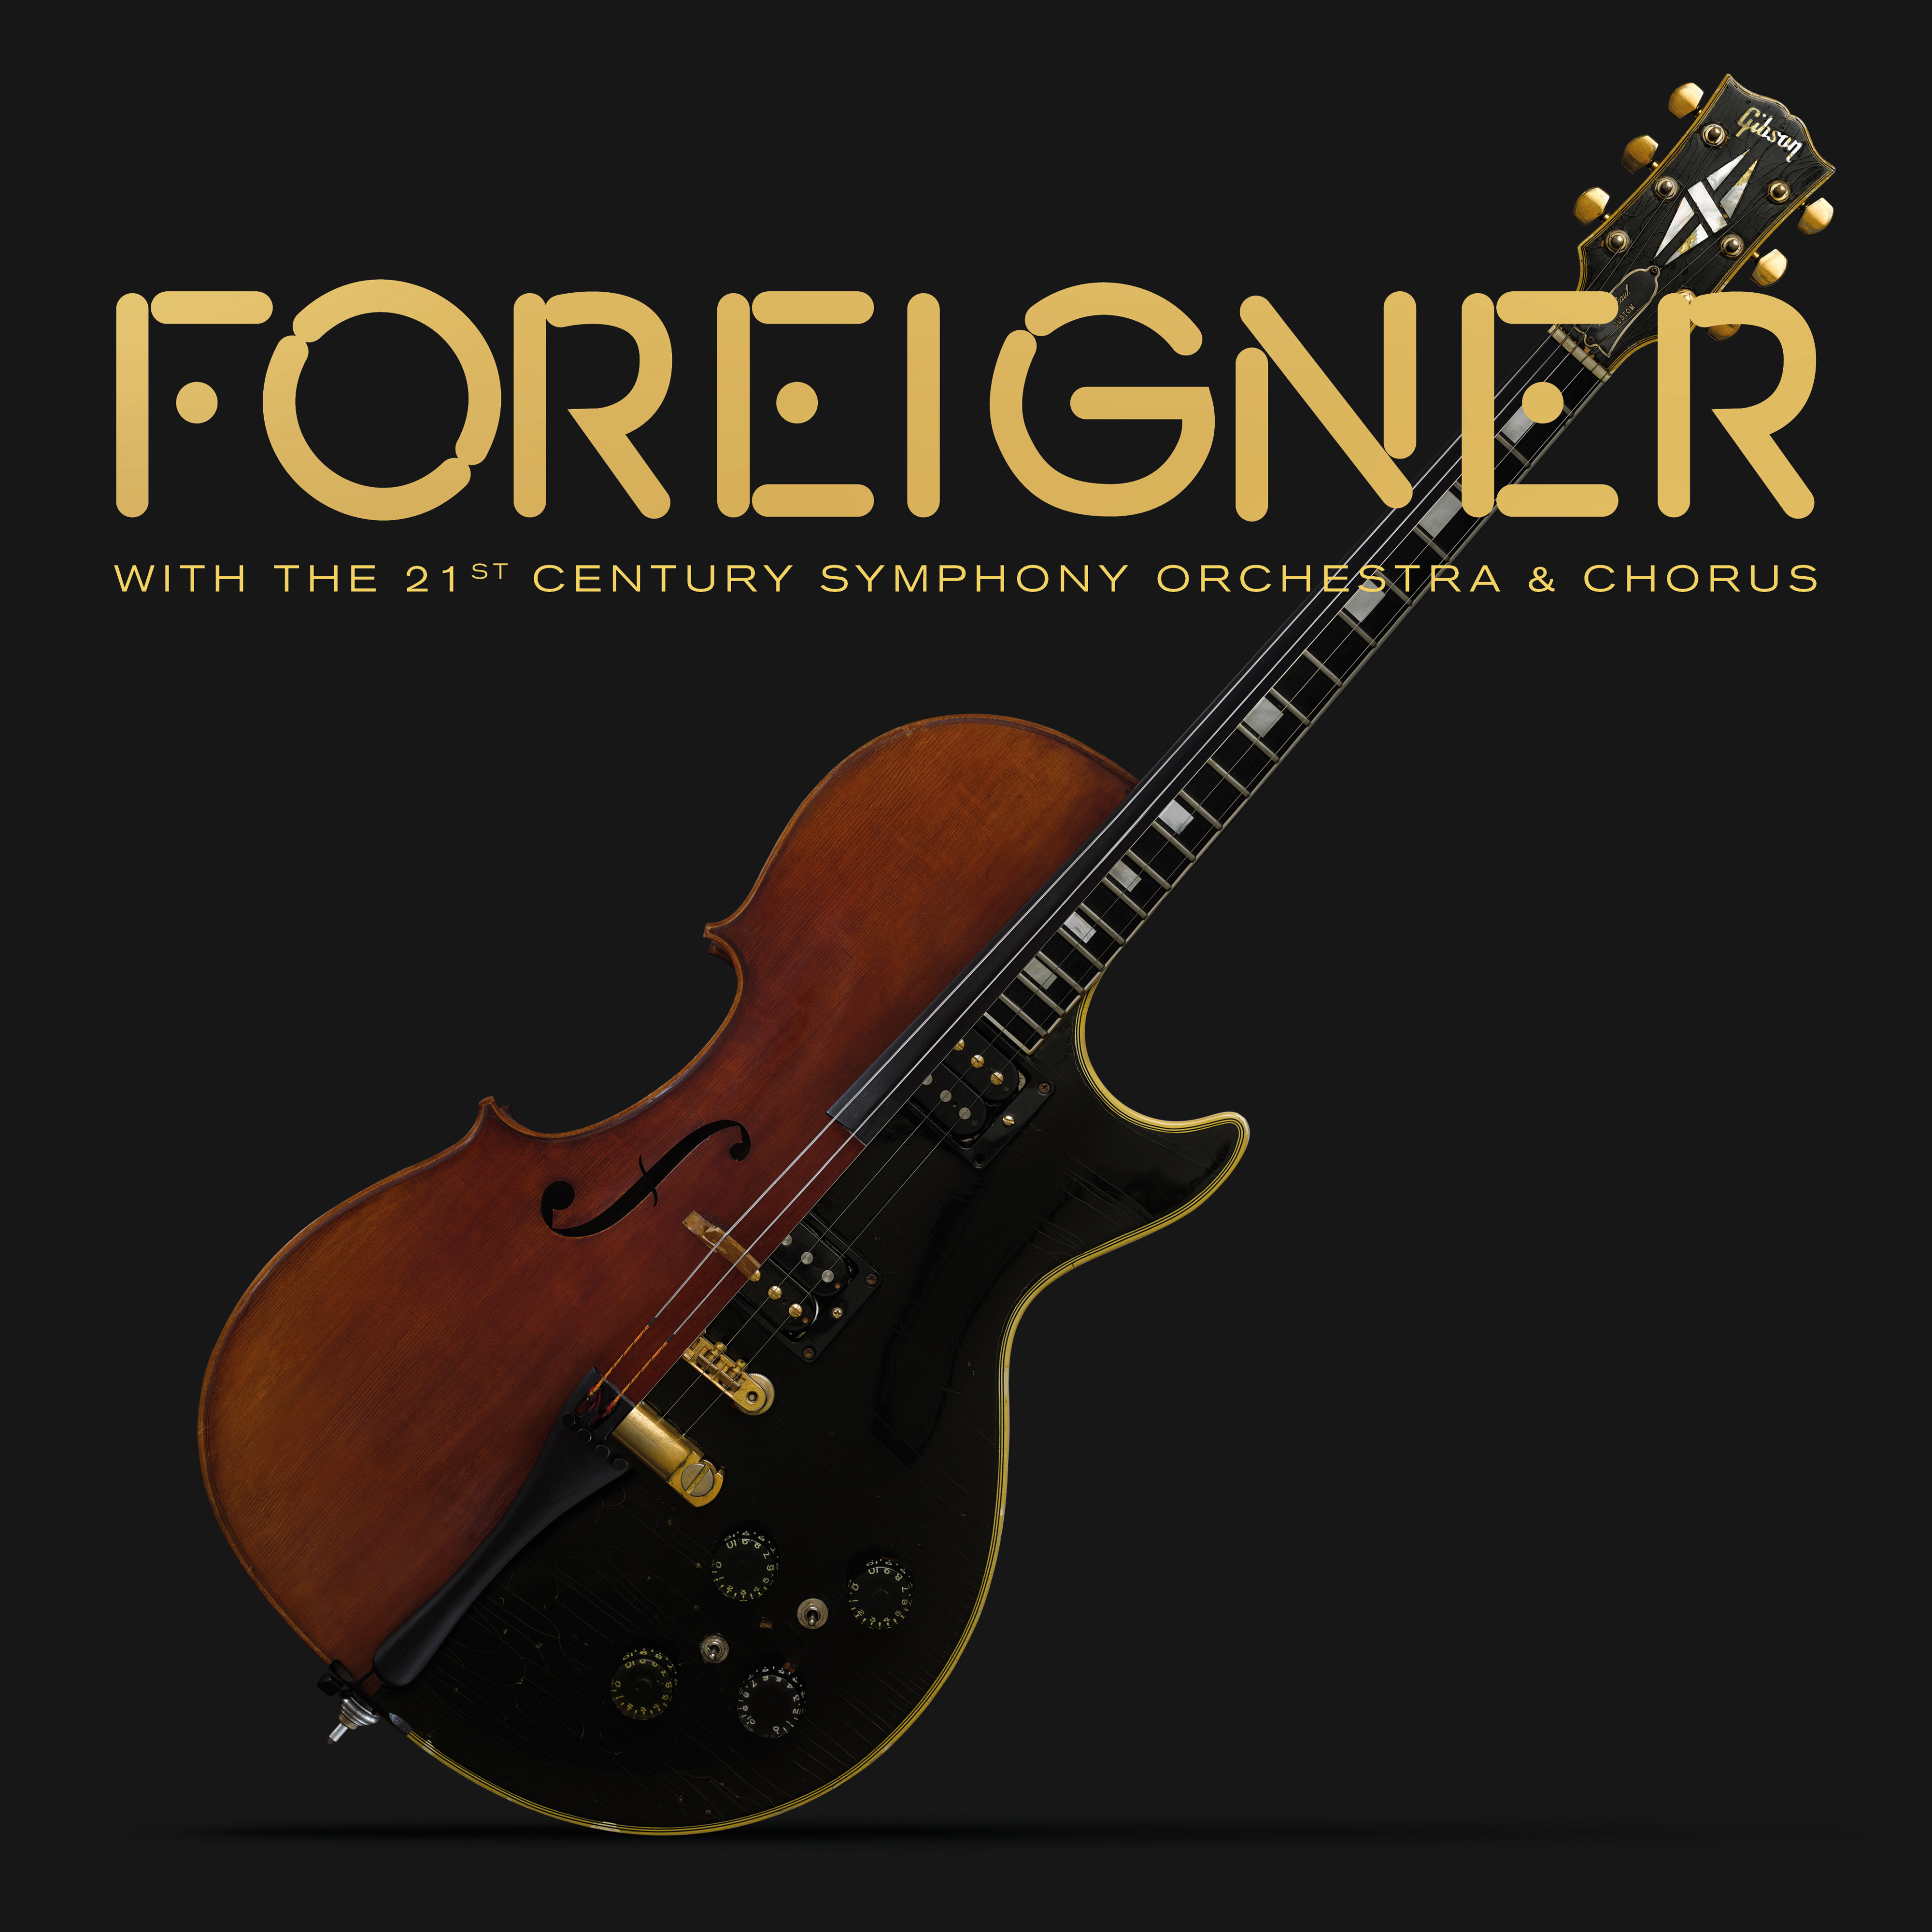 Foreigner - With the 21st Century Symphony Orch - CD+DVD+2LP